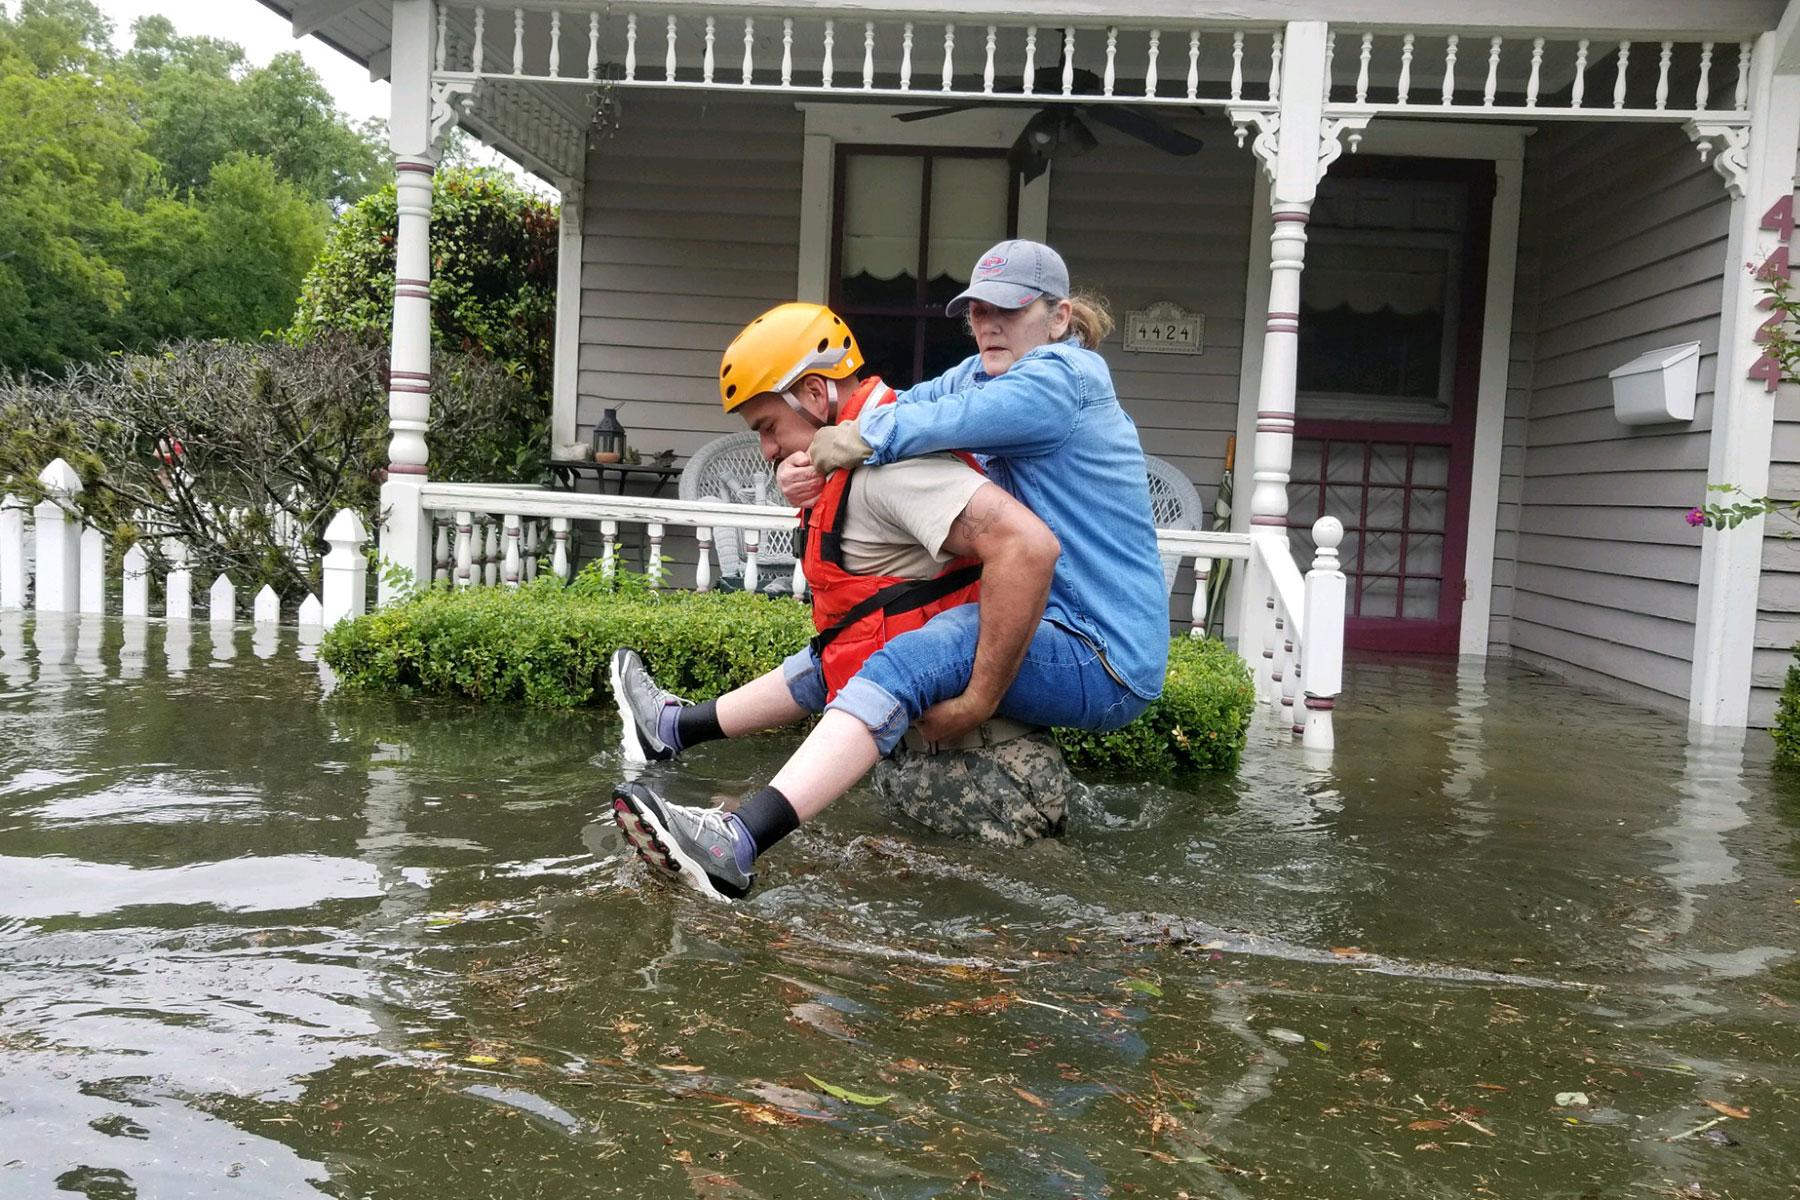 Texas National Guard soldiers conduct rescue operations in flooded areas around Houston, Texas 27 August, 2017. (Texas National Guard/Zachary West)